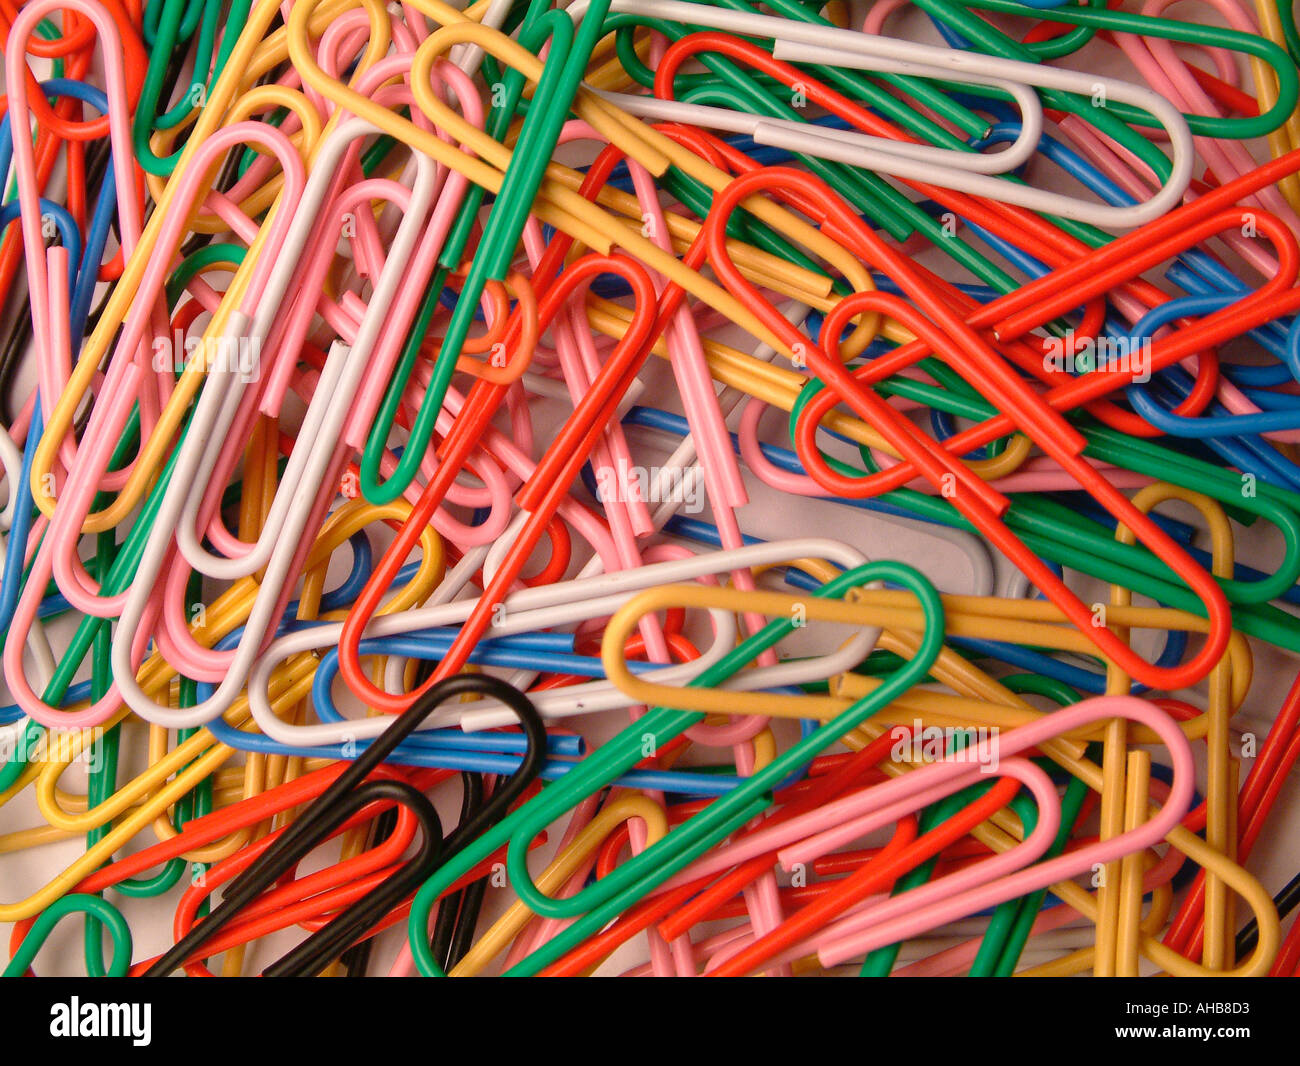 Pile of multi coloured paper clips Stock Photo - Alamy